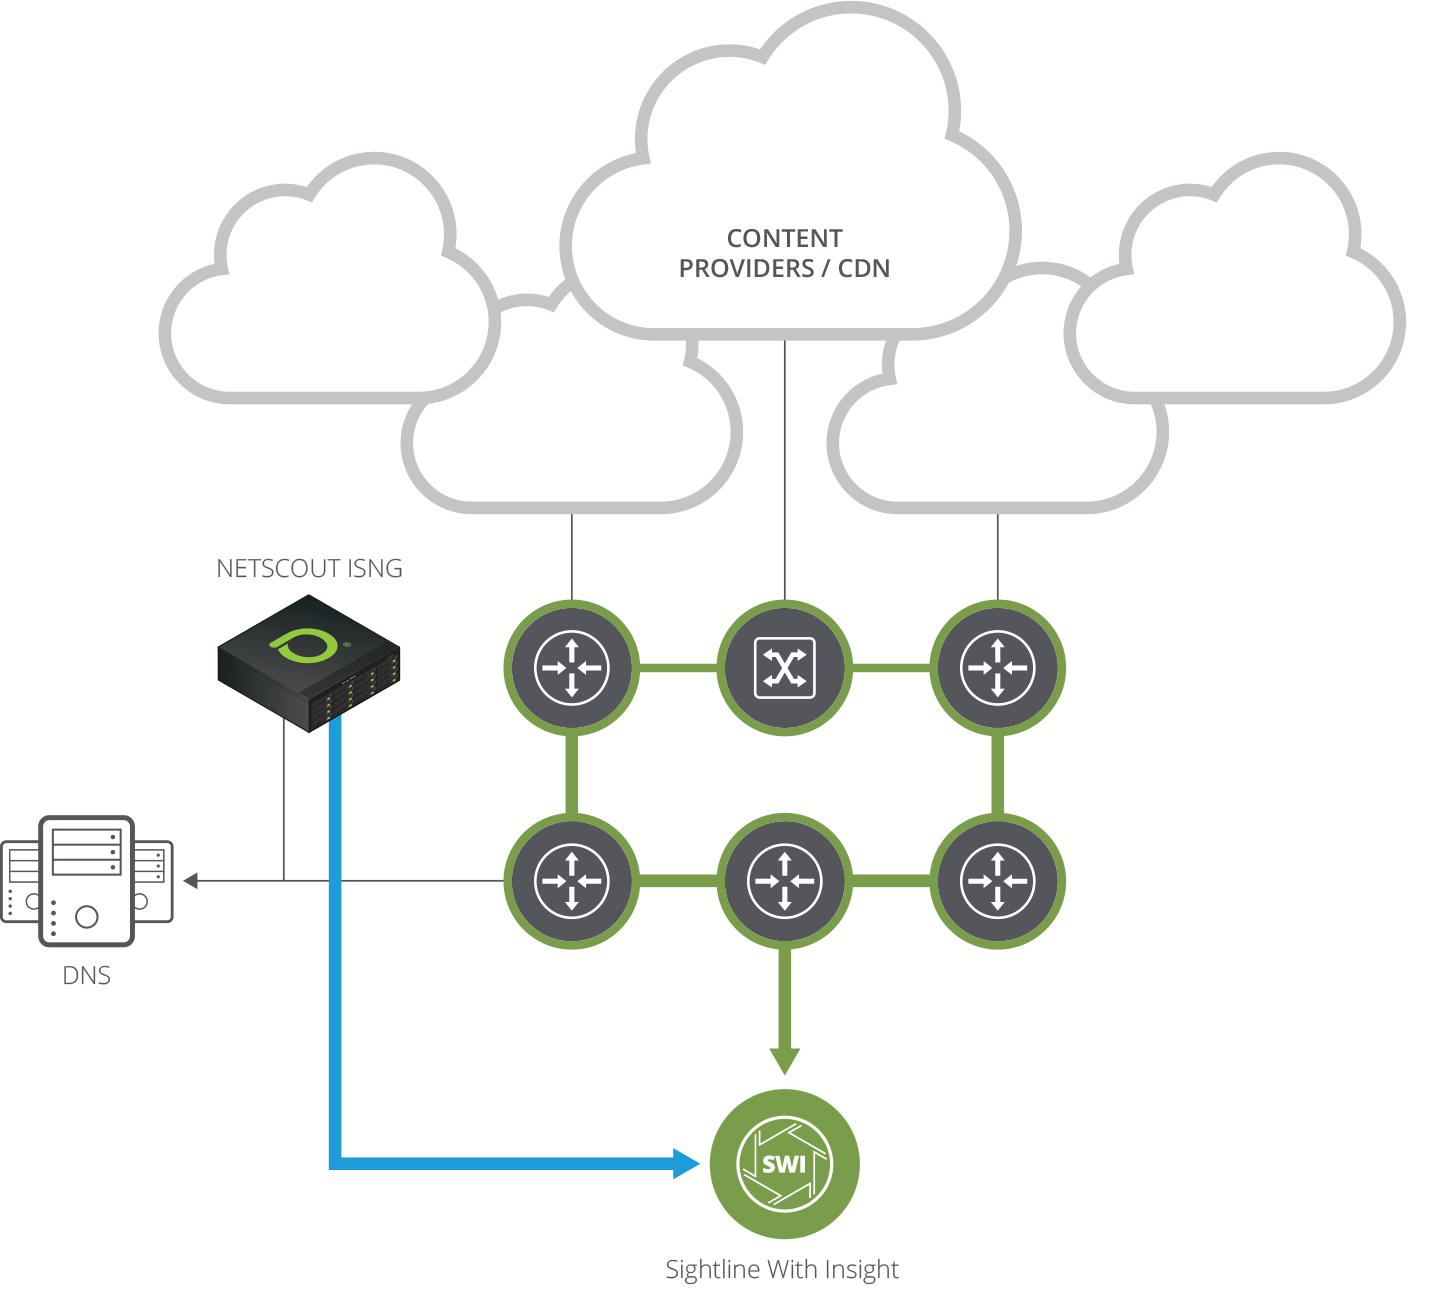 How NETSCOUT Helps